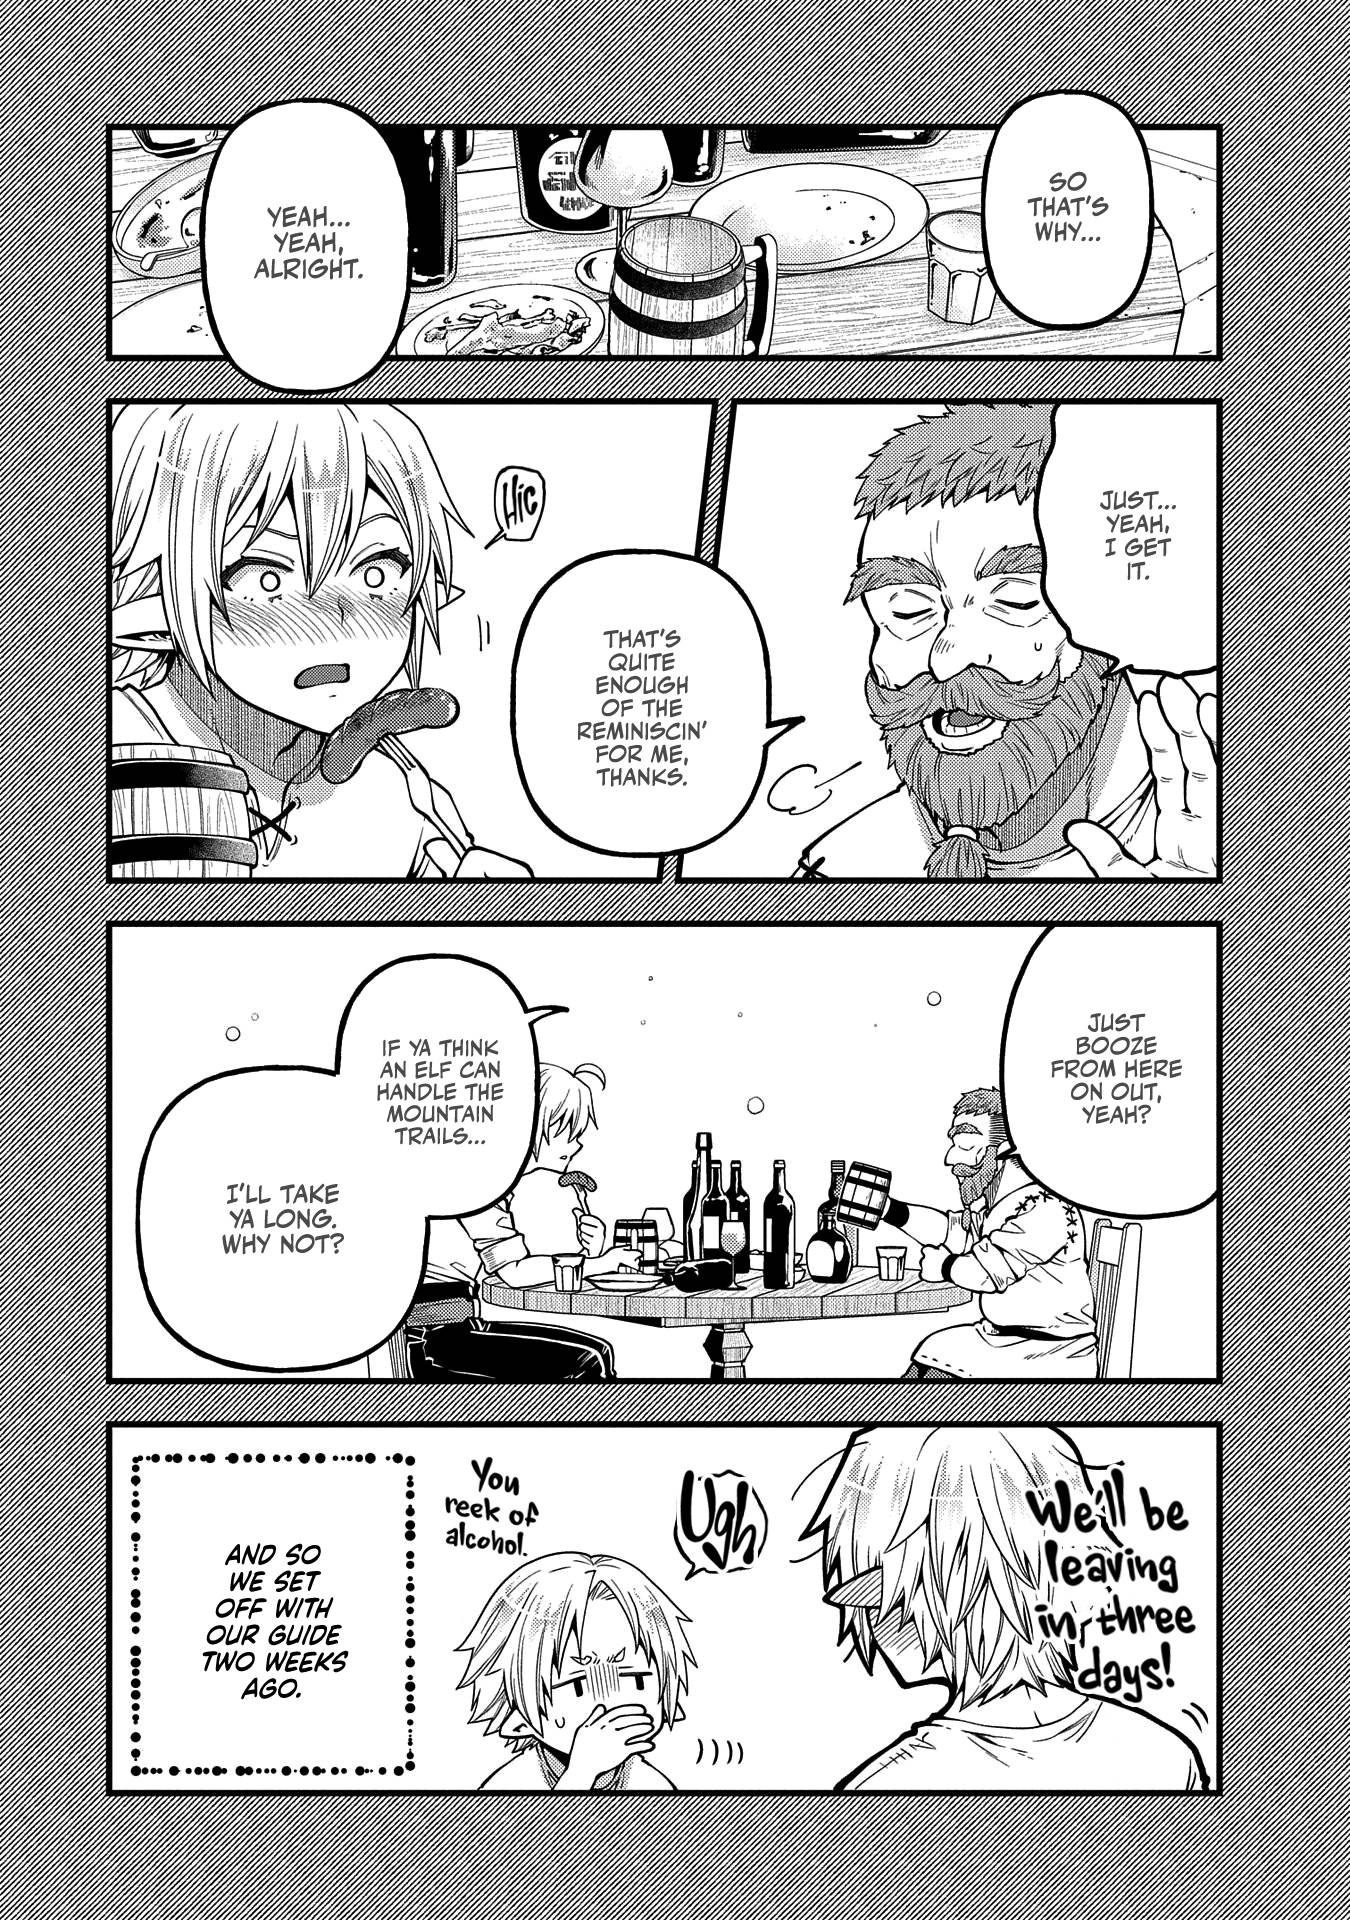 Growing Tired Of The Lazy High Elf Life After 120 Years - chapter 15 - #5